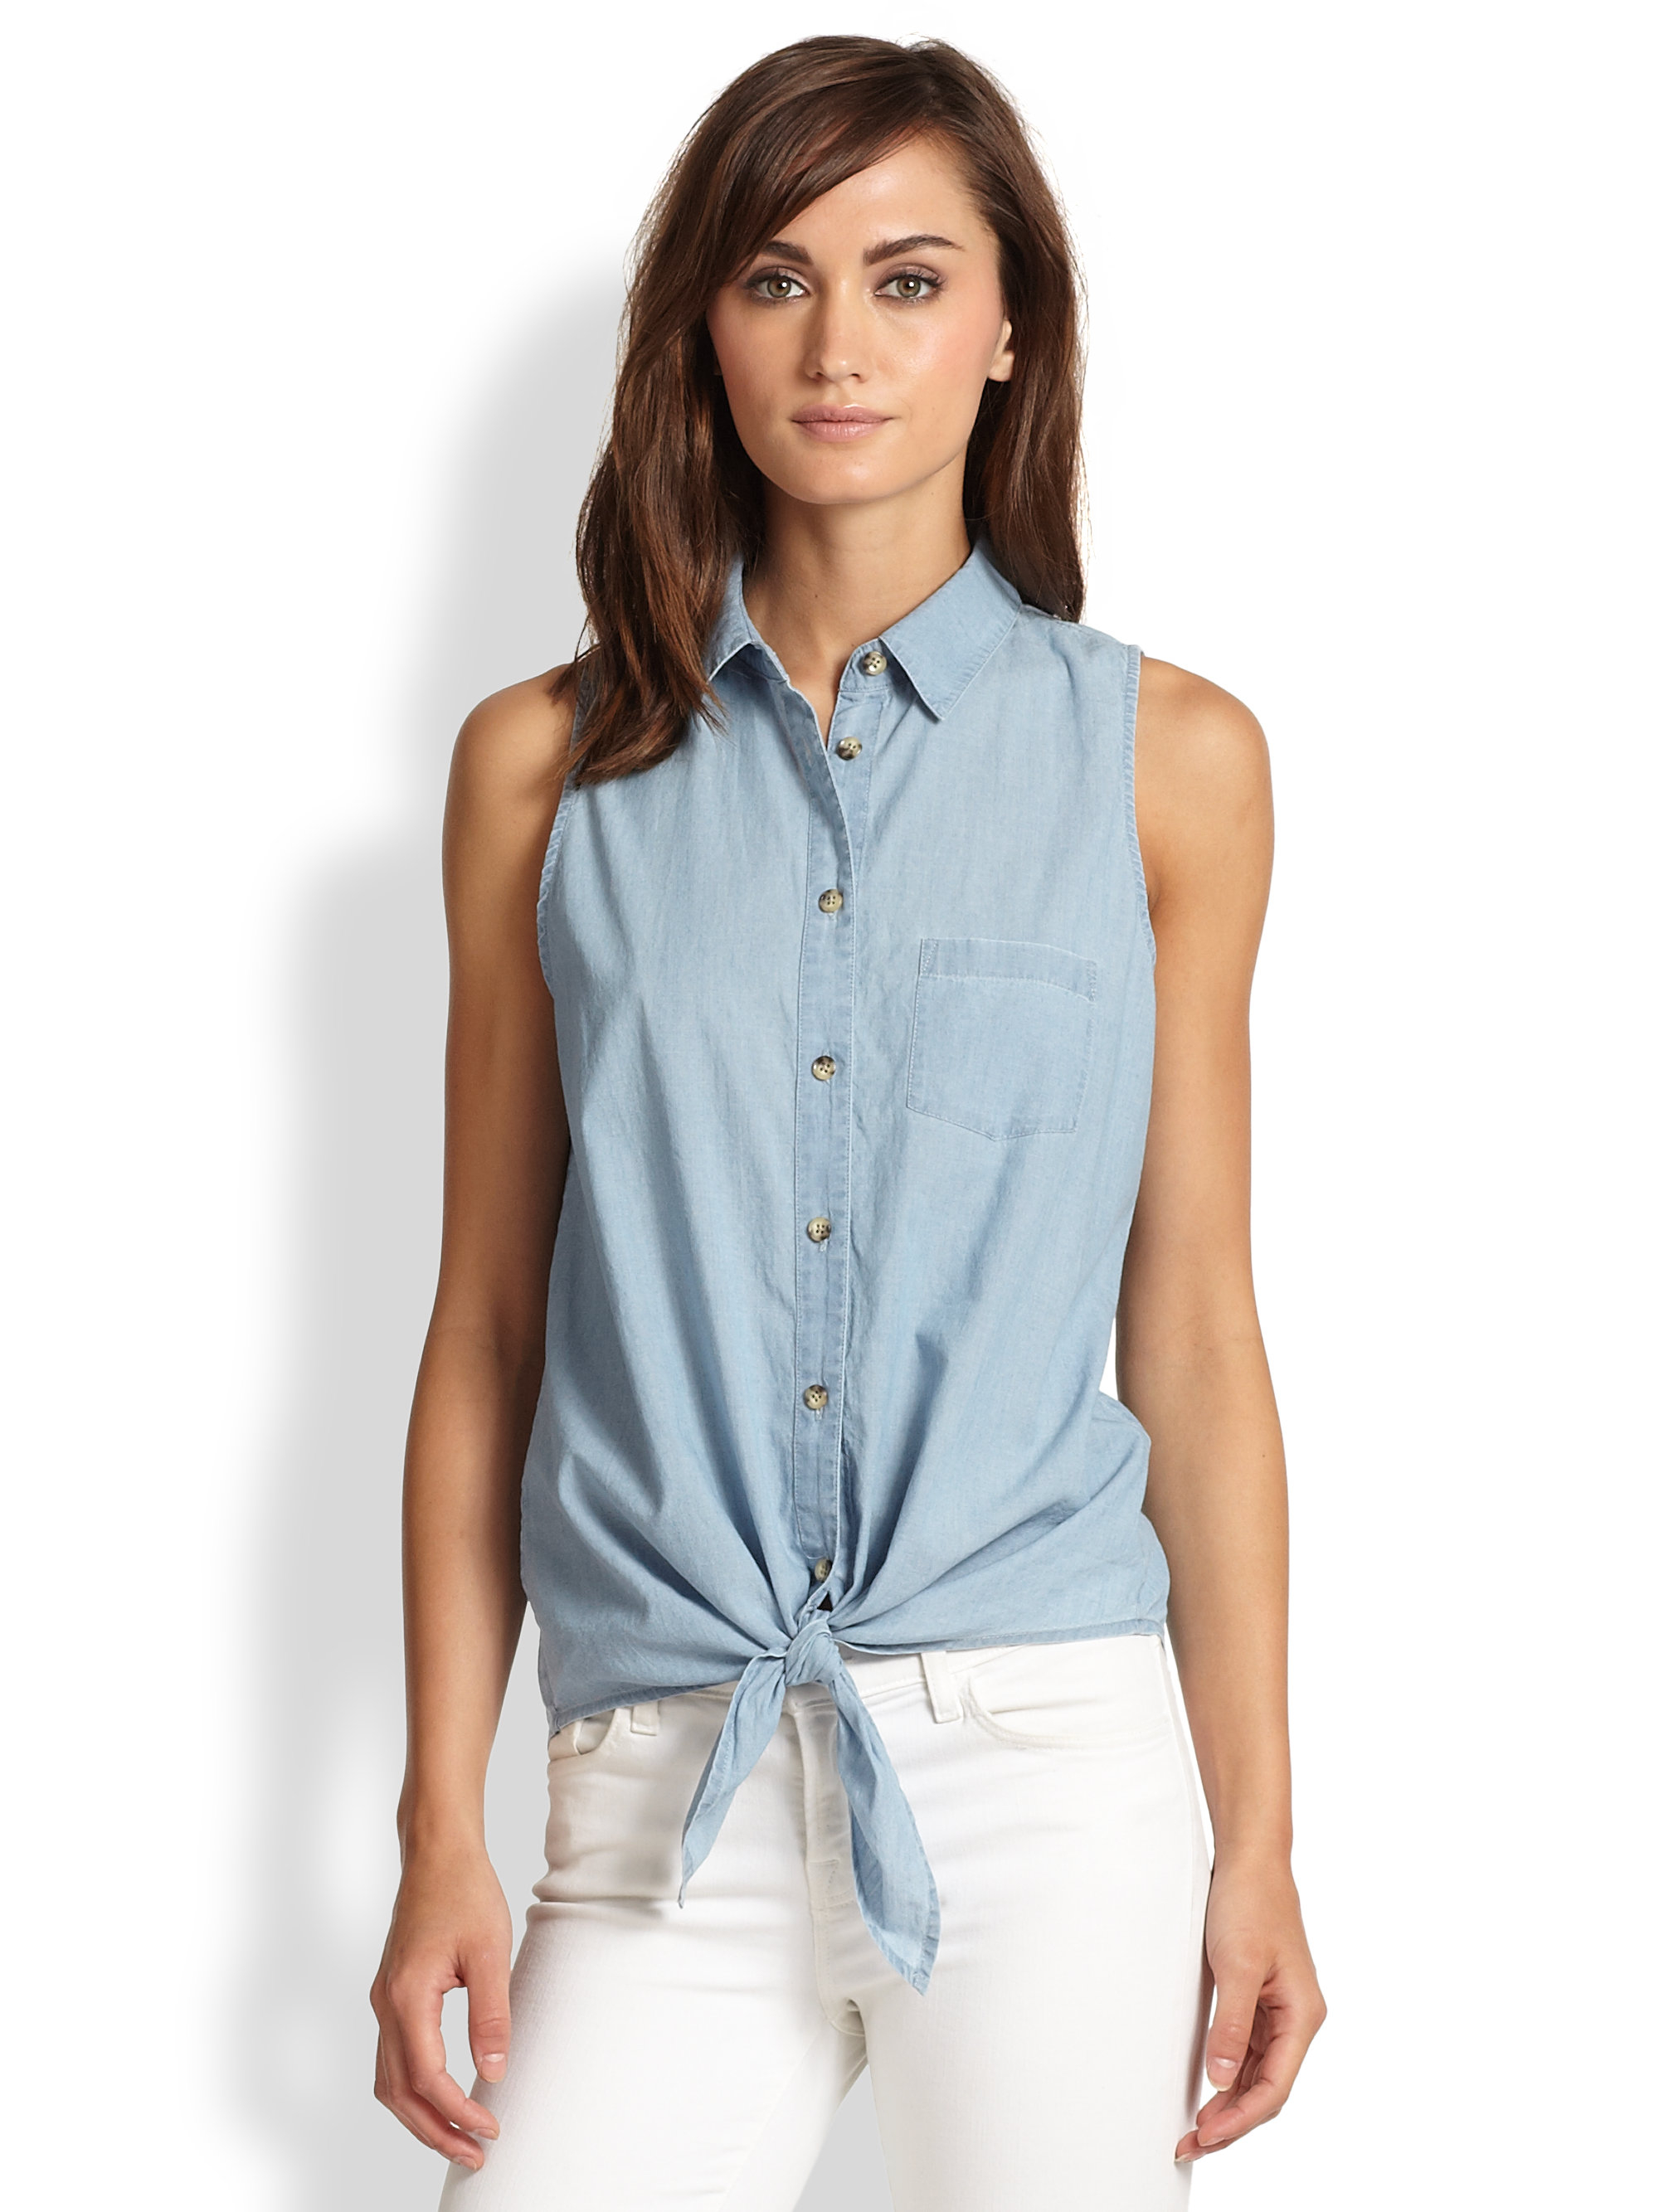 Lyst - Equipment Mina Tiefront Sleeveless Chambray Shirt in Blue